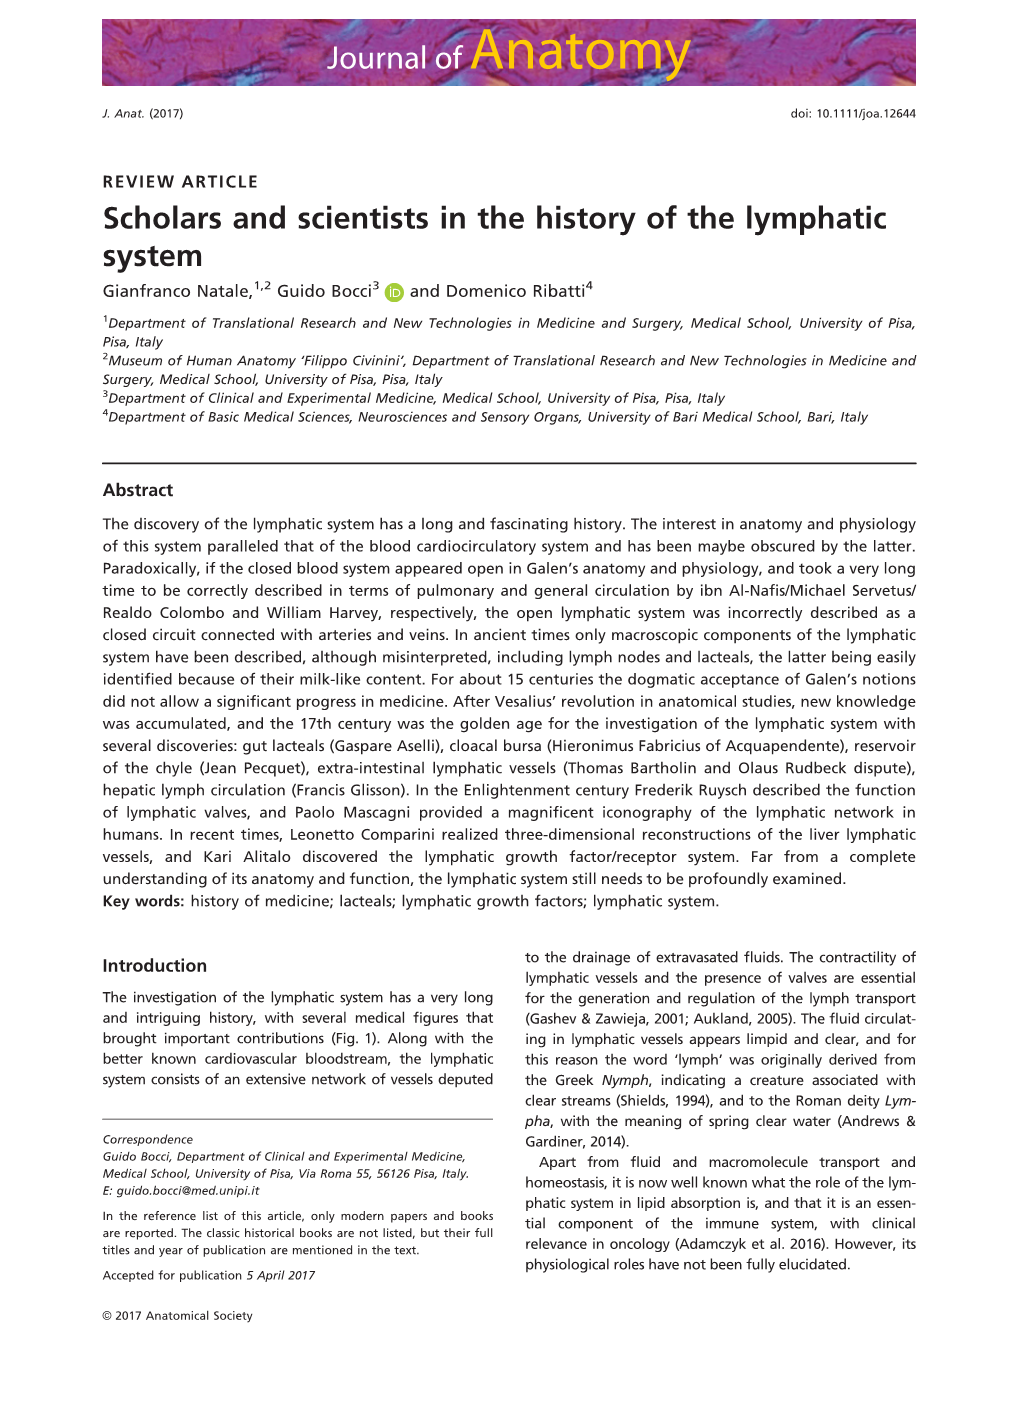 Scholars and Scientists in the History of the Lymphatic System Gianfranco Natale,1,2 Guido Bocci3 and Domenico Ribatti4